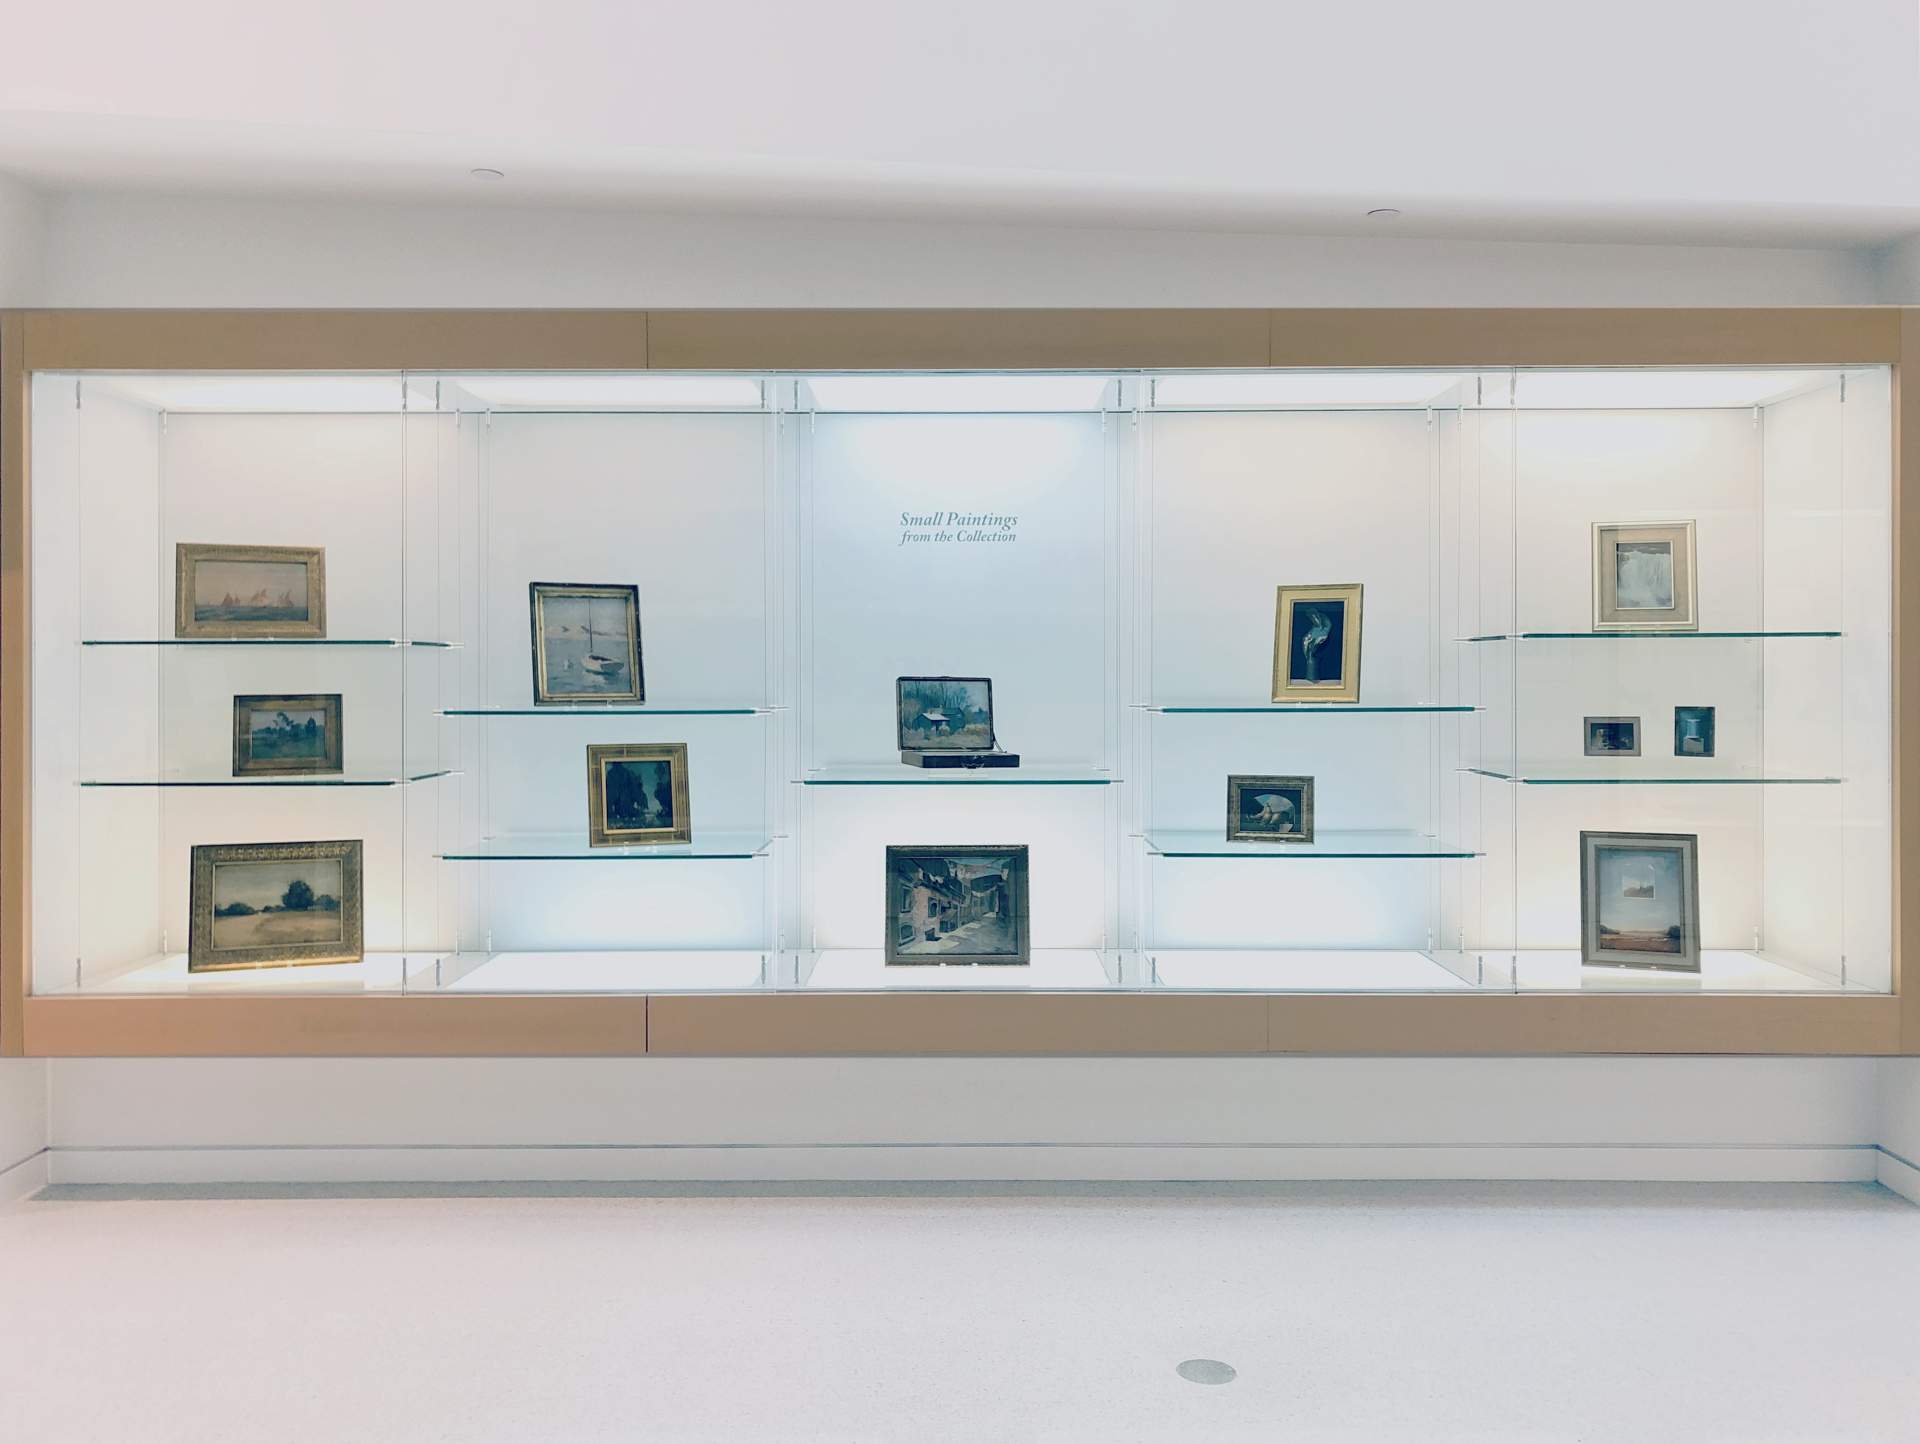 [Photograph of the exhibition display "Small Paintings from the Collection"]